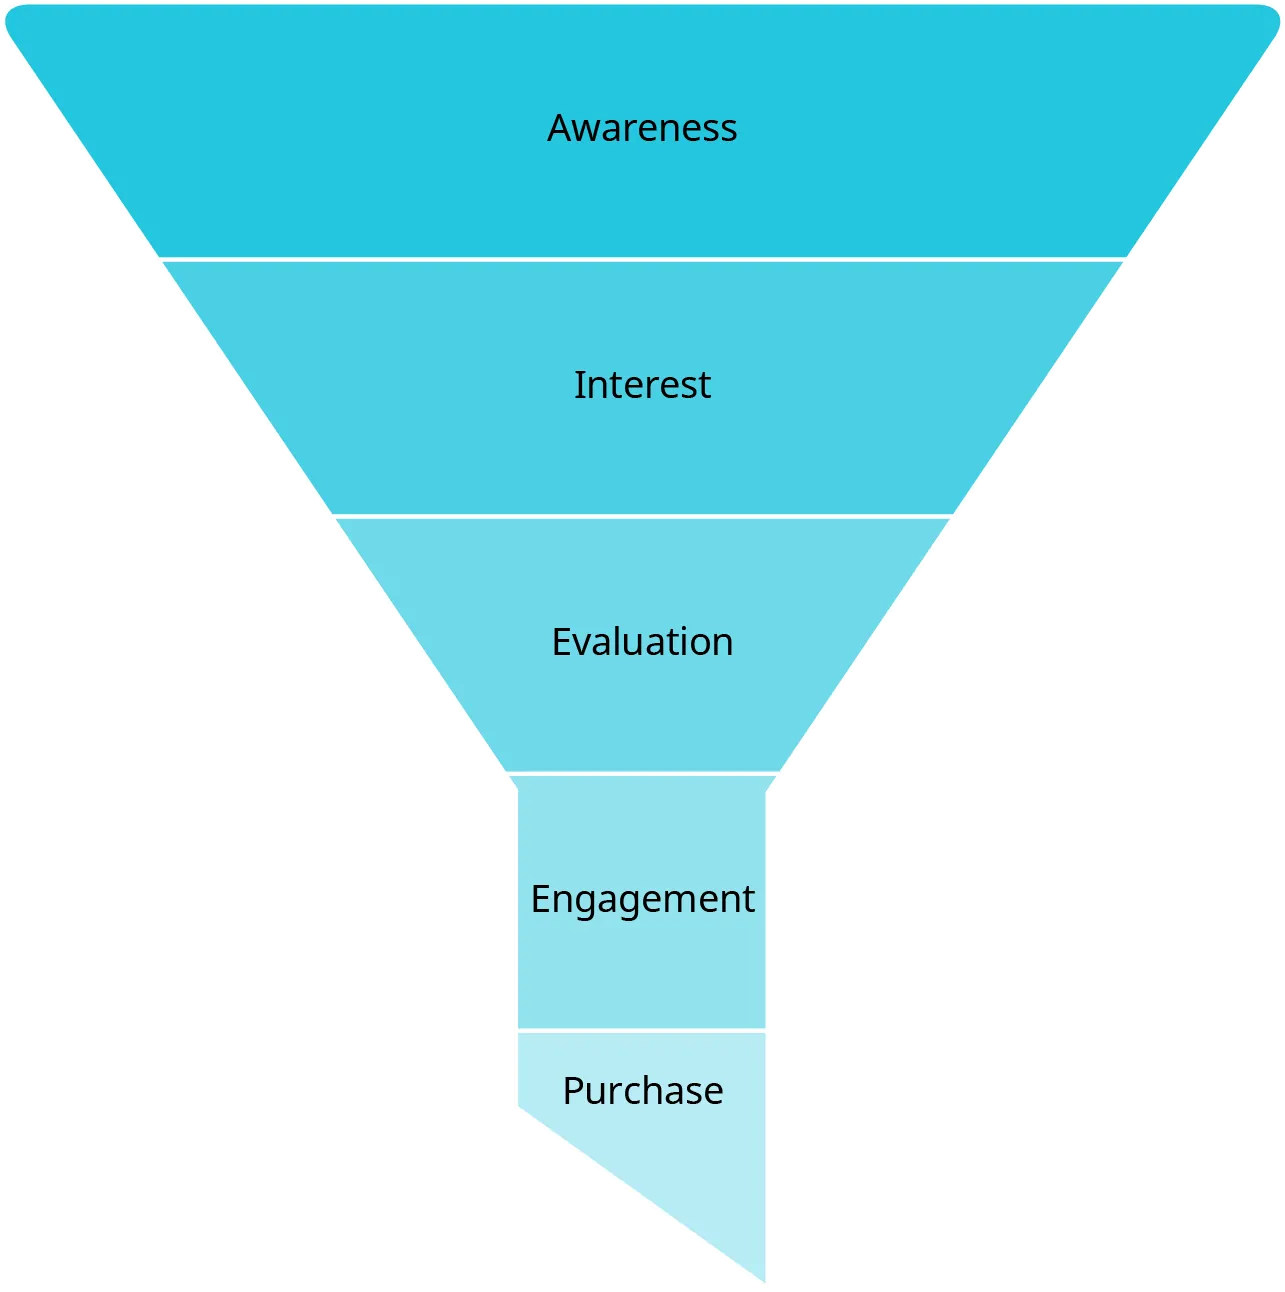 A funnel shows the five stages of the customer journey from awareness through purchase. The stages get smaller as you move down the funnel. Starting at the top, the stages are awareness, interest, evaluation, engagement, and purchase.